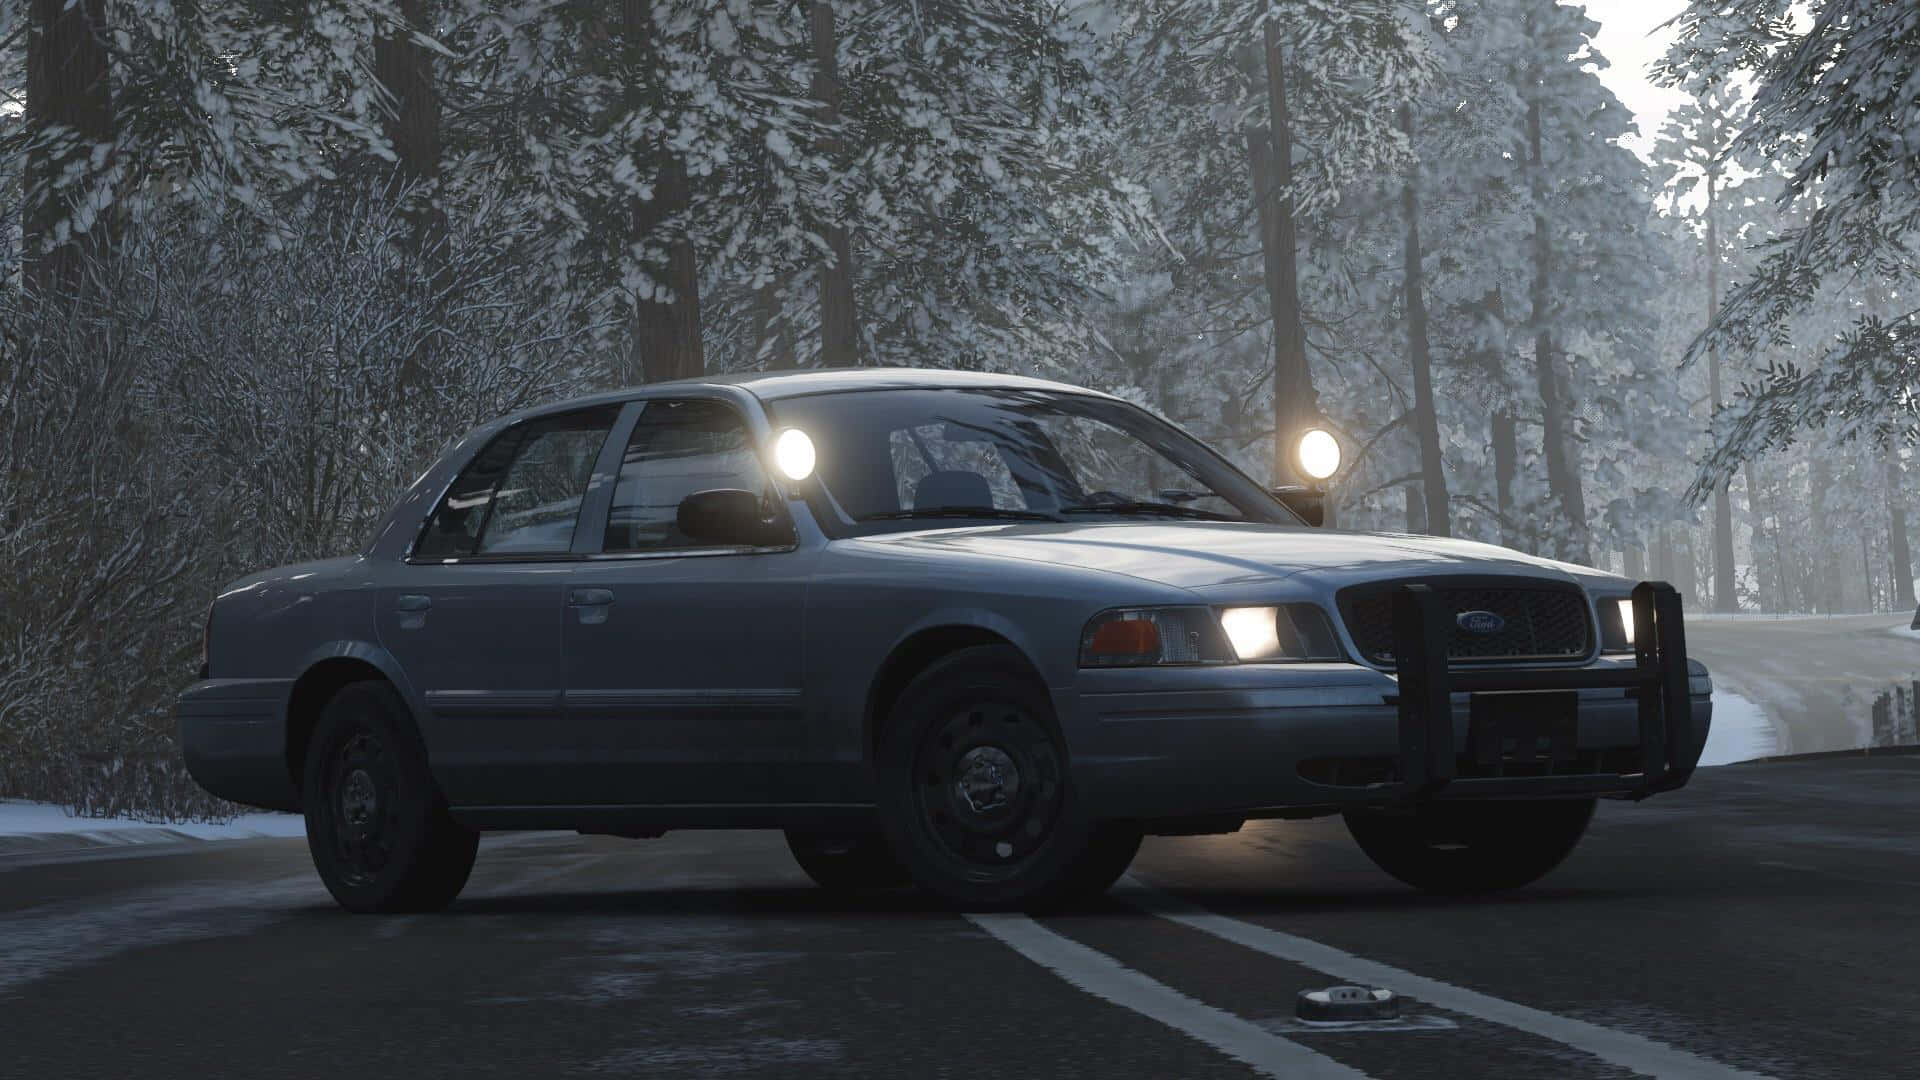 Stunning Ford Crown Victoria in Action Wallpaper